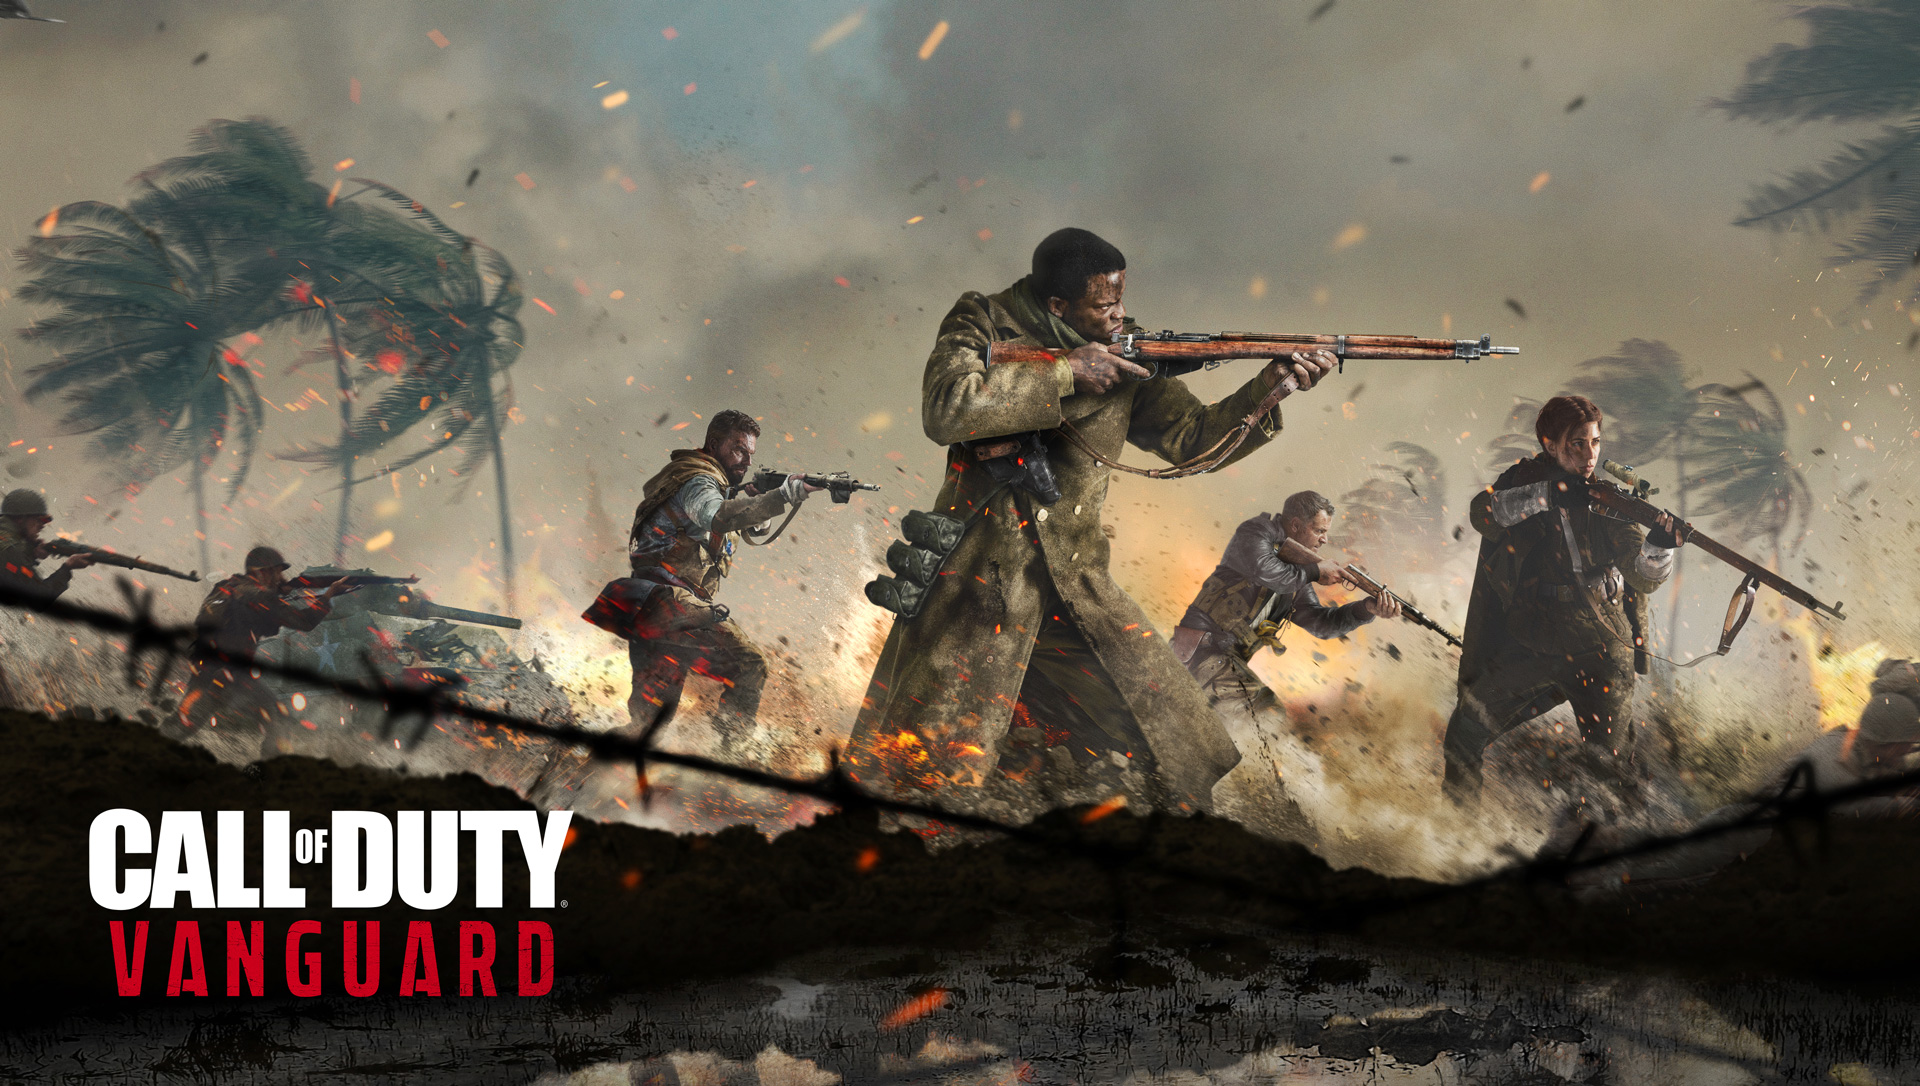 Call of Duty Vanguard promotional image